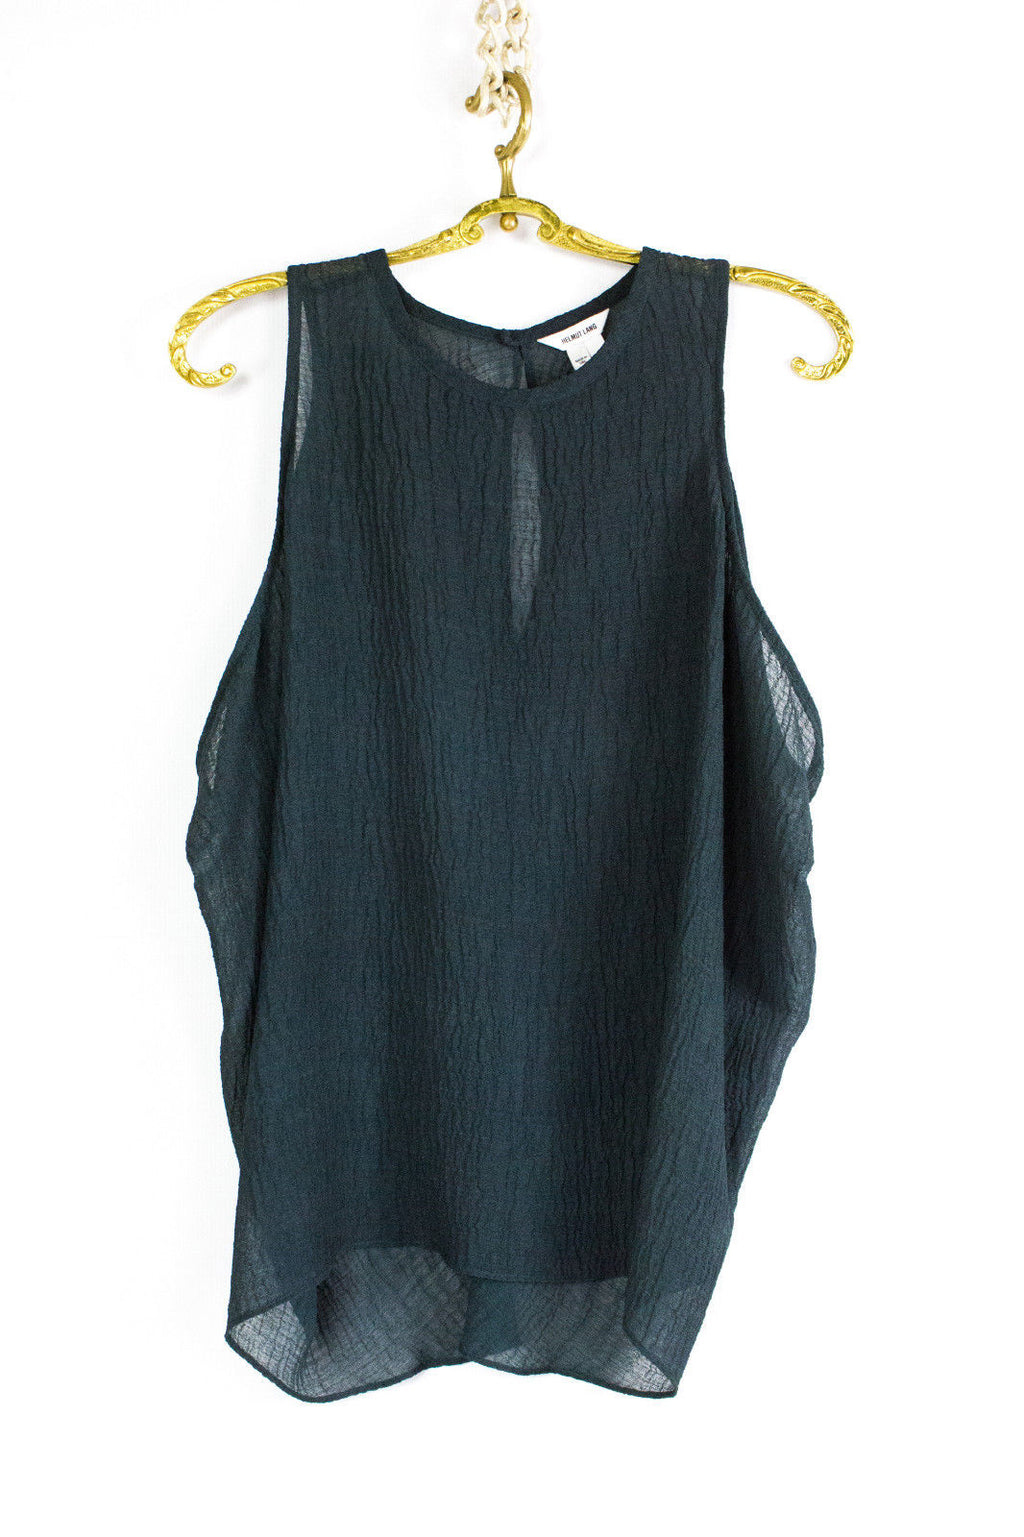 HELMUT LANG Dark Green Sheer Sleeveless Top Blouse, SIZE S - secondfirst